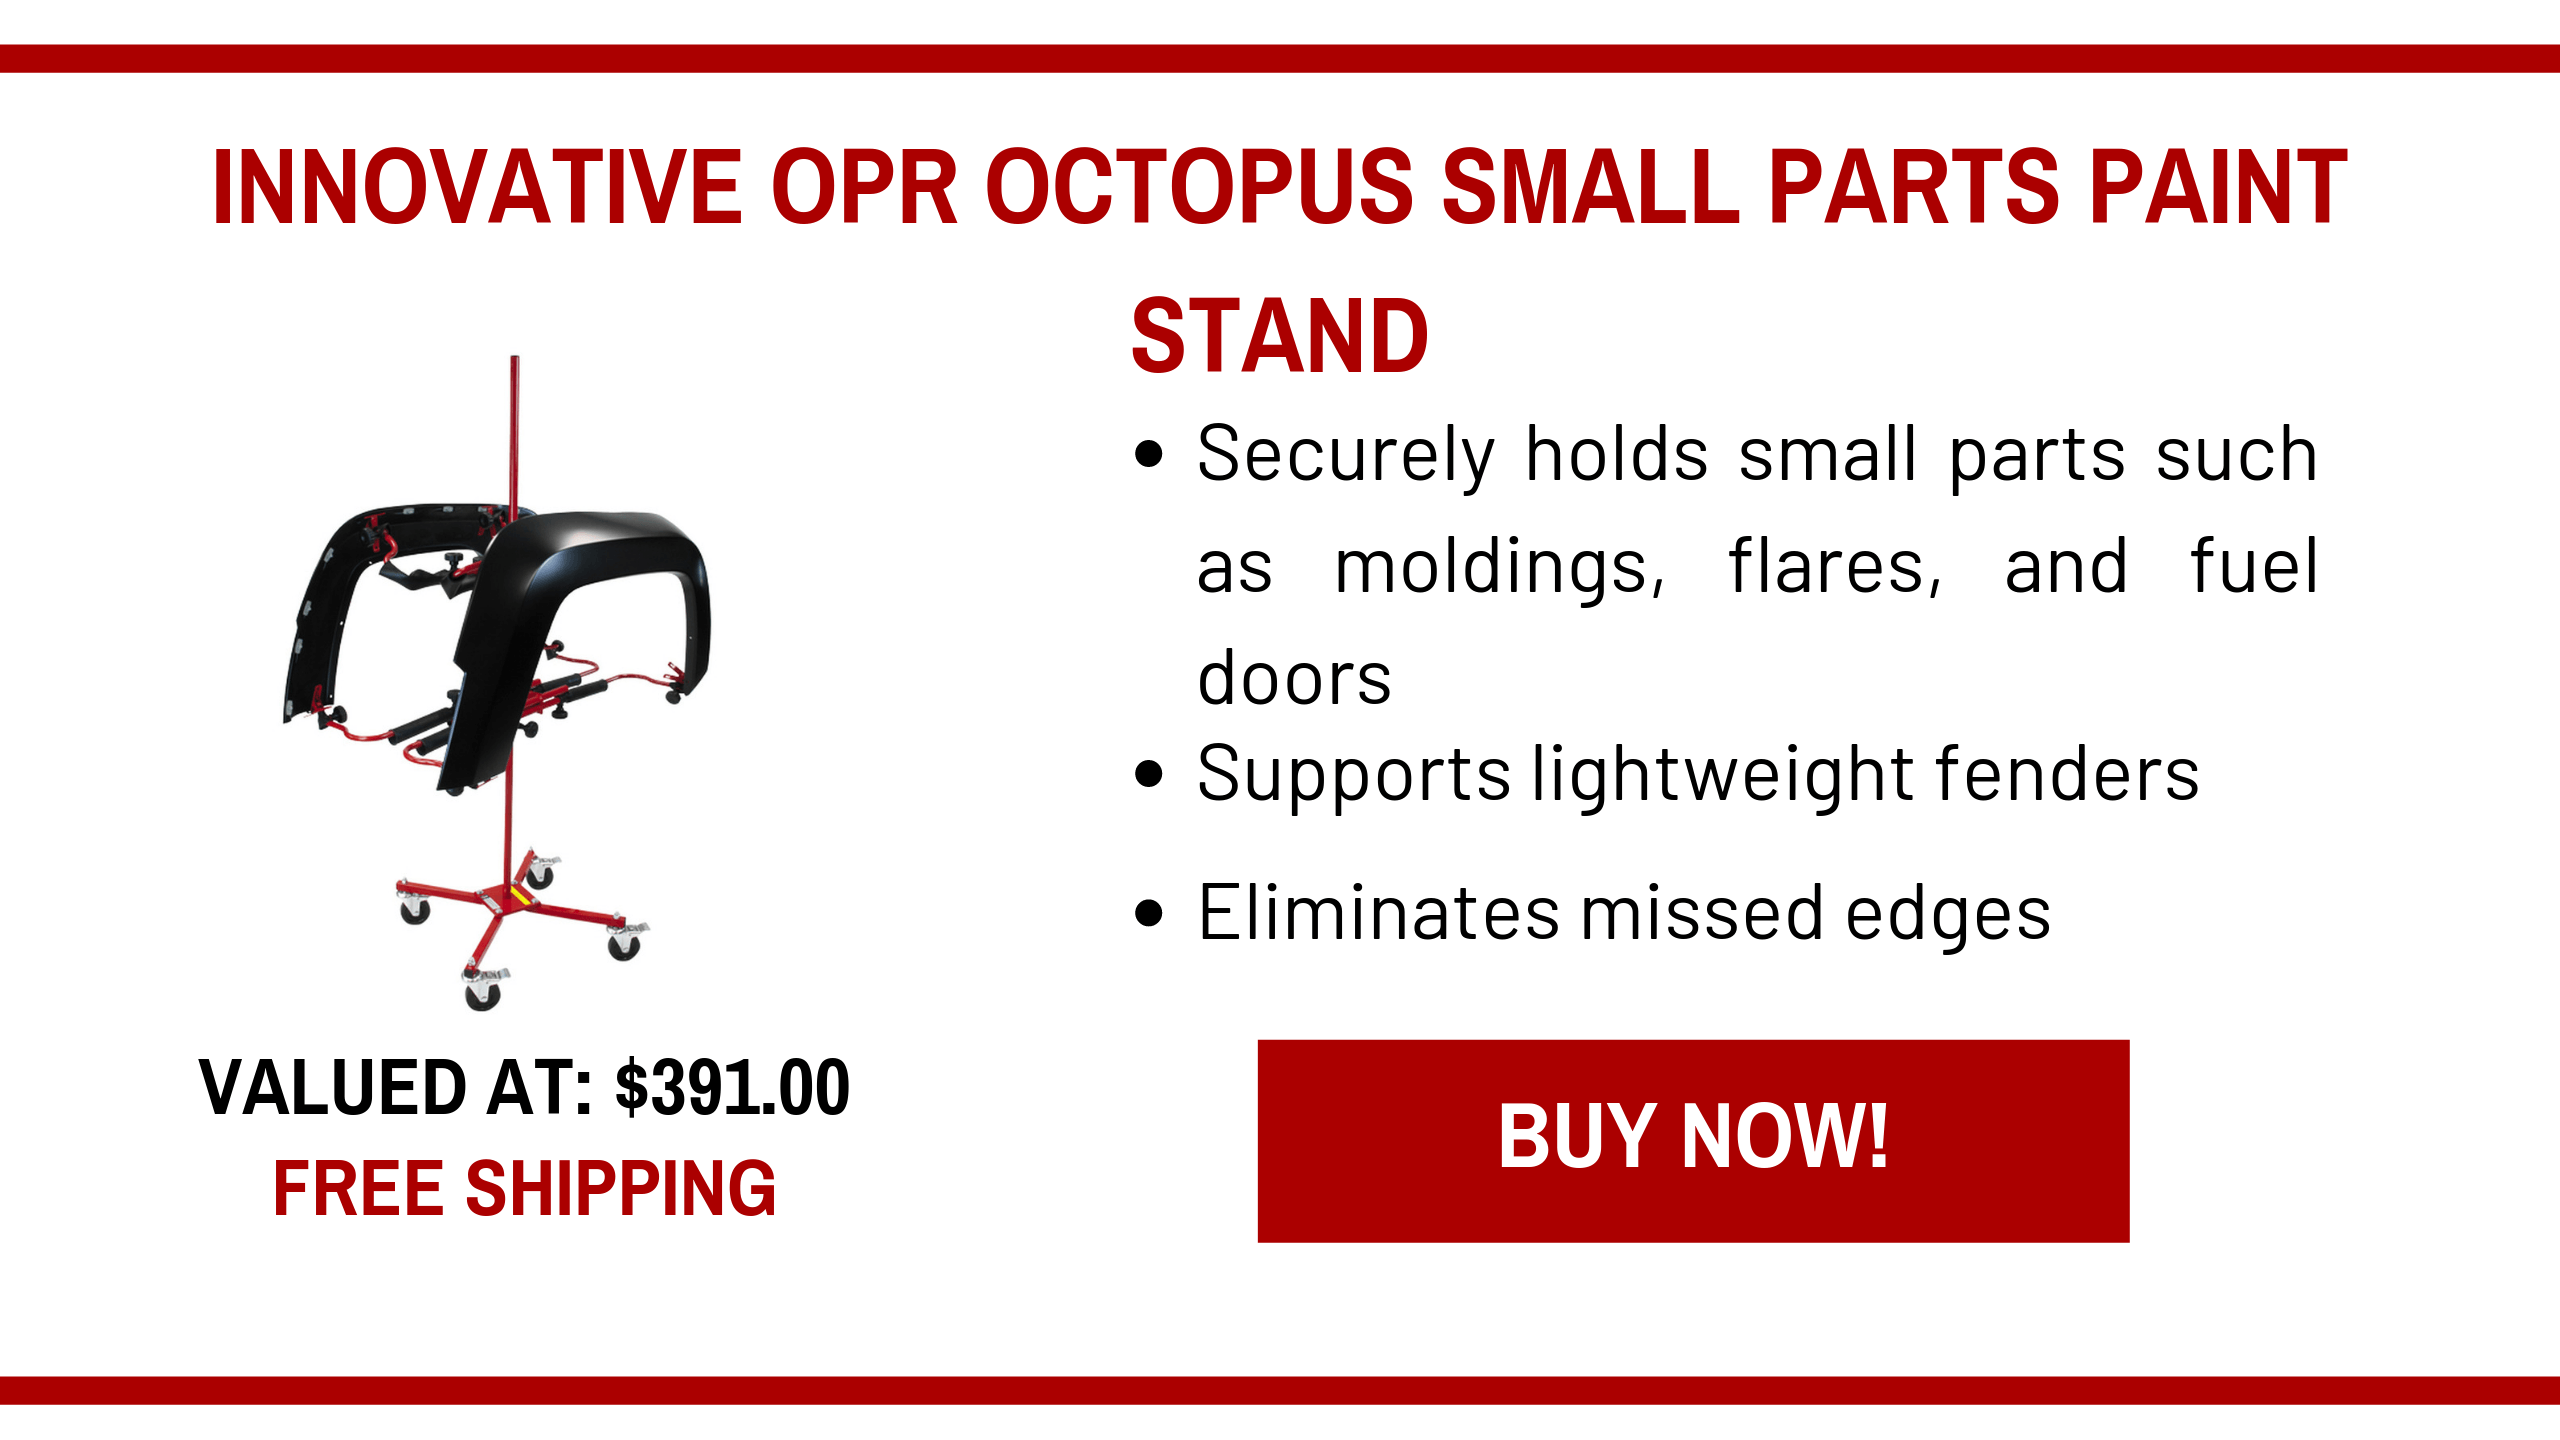 Innovative OPR Small Parts Paint Stand